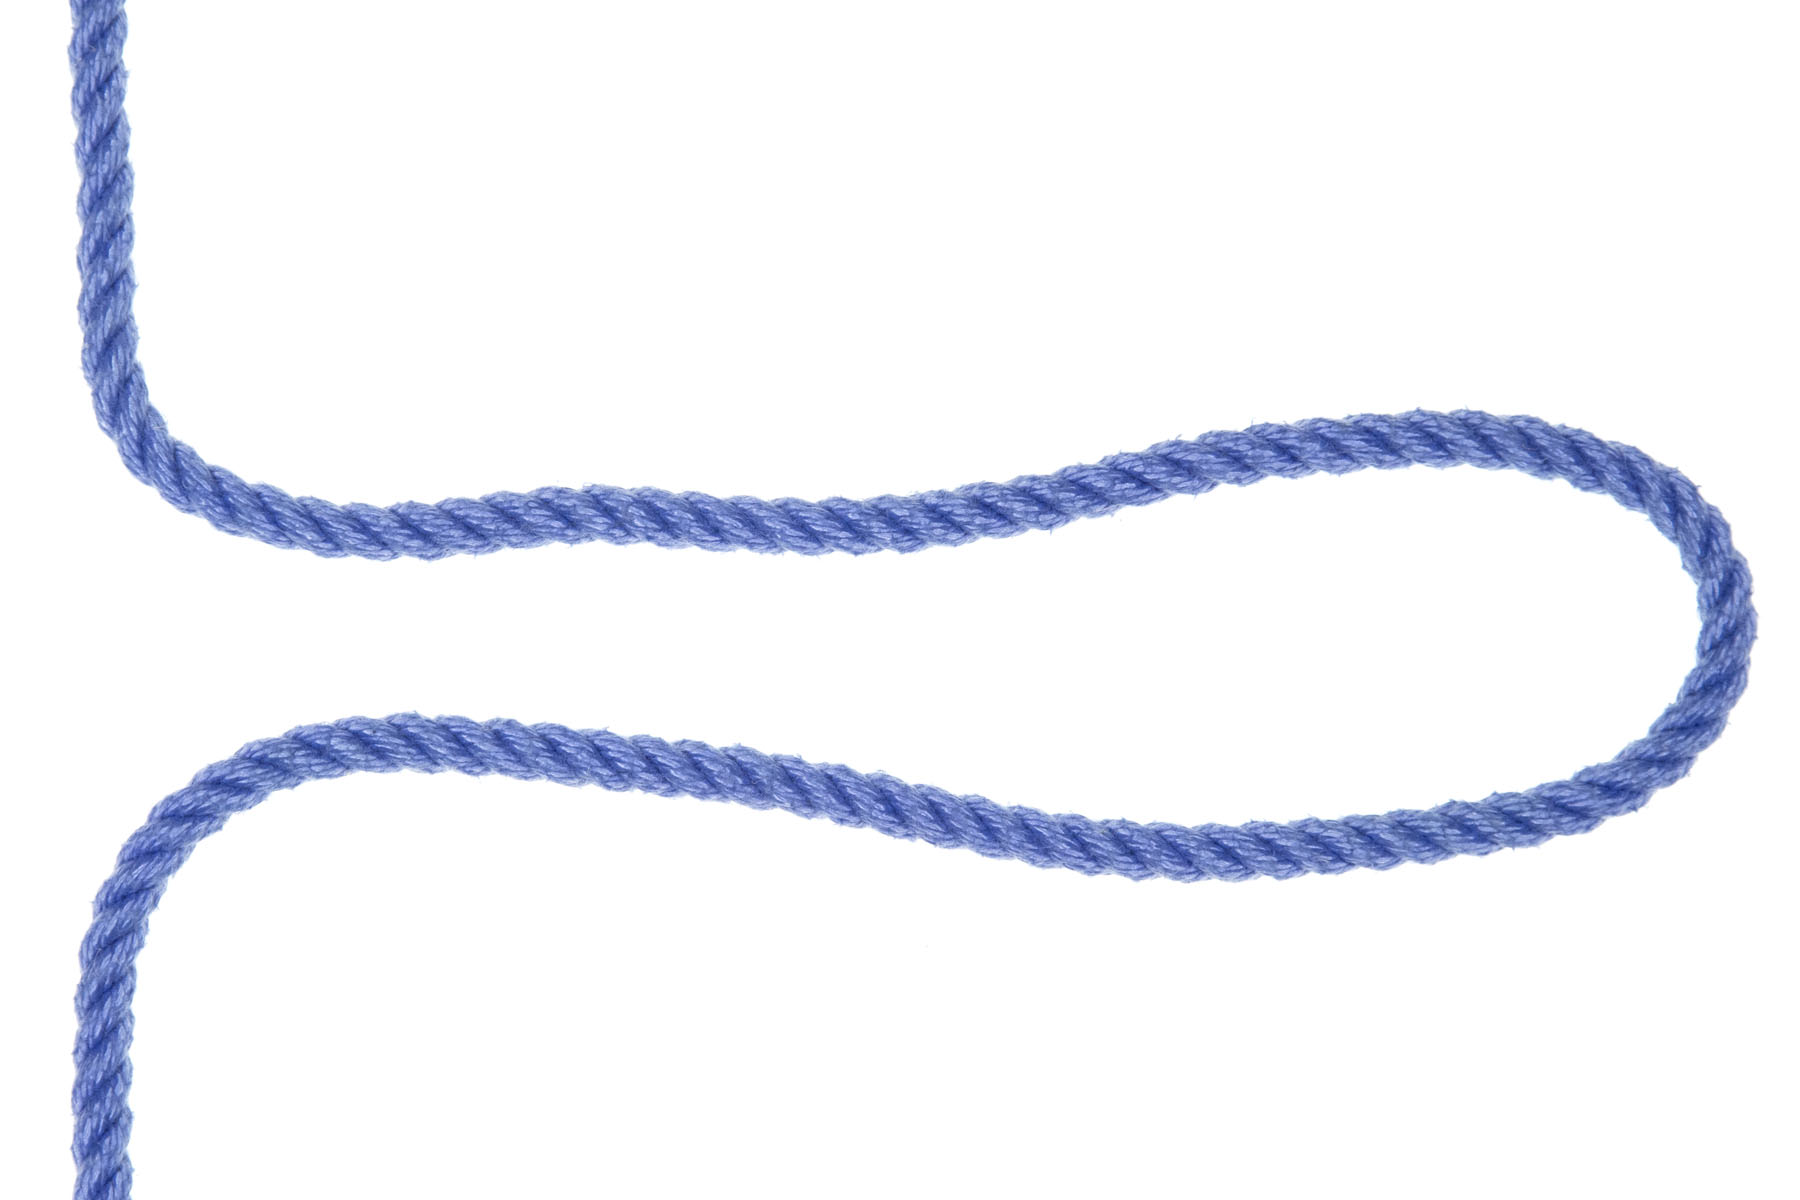 A blue rope enters from the top left. It is pulled into a twelve inch bight that points to the right. The end of the rope exits at the bottom left.